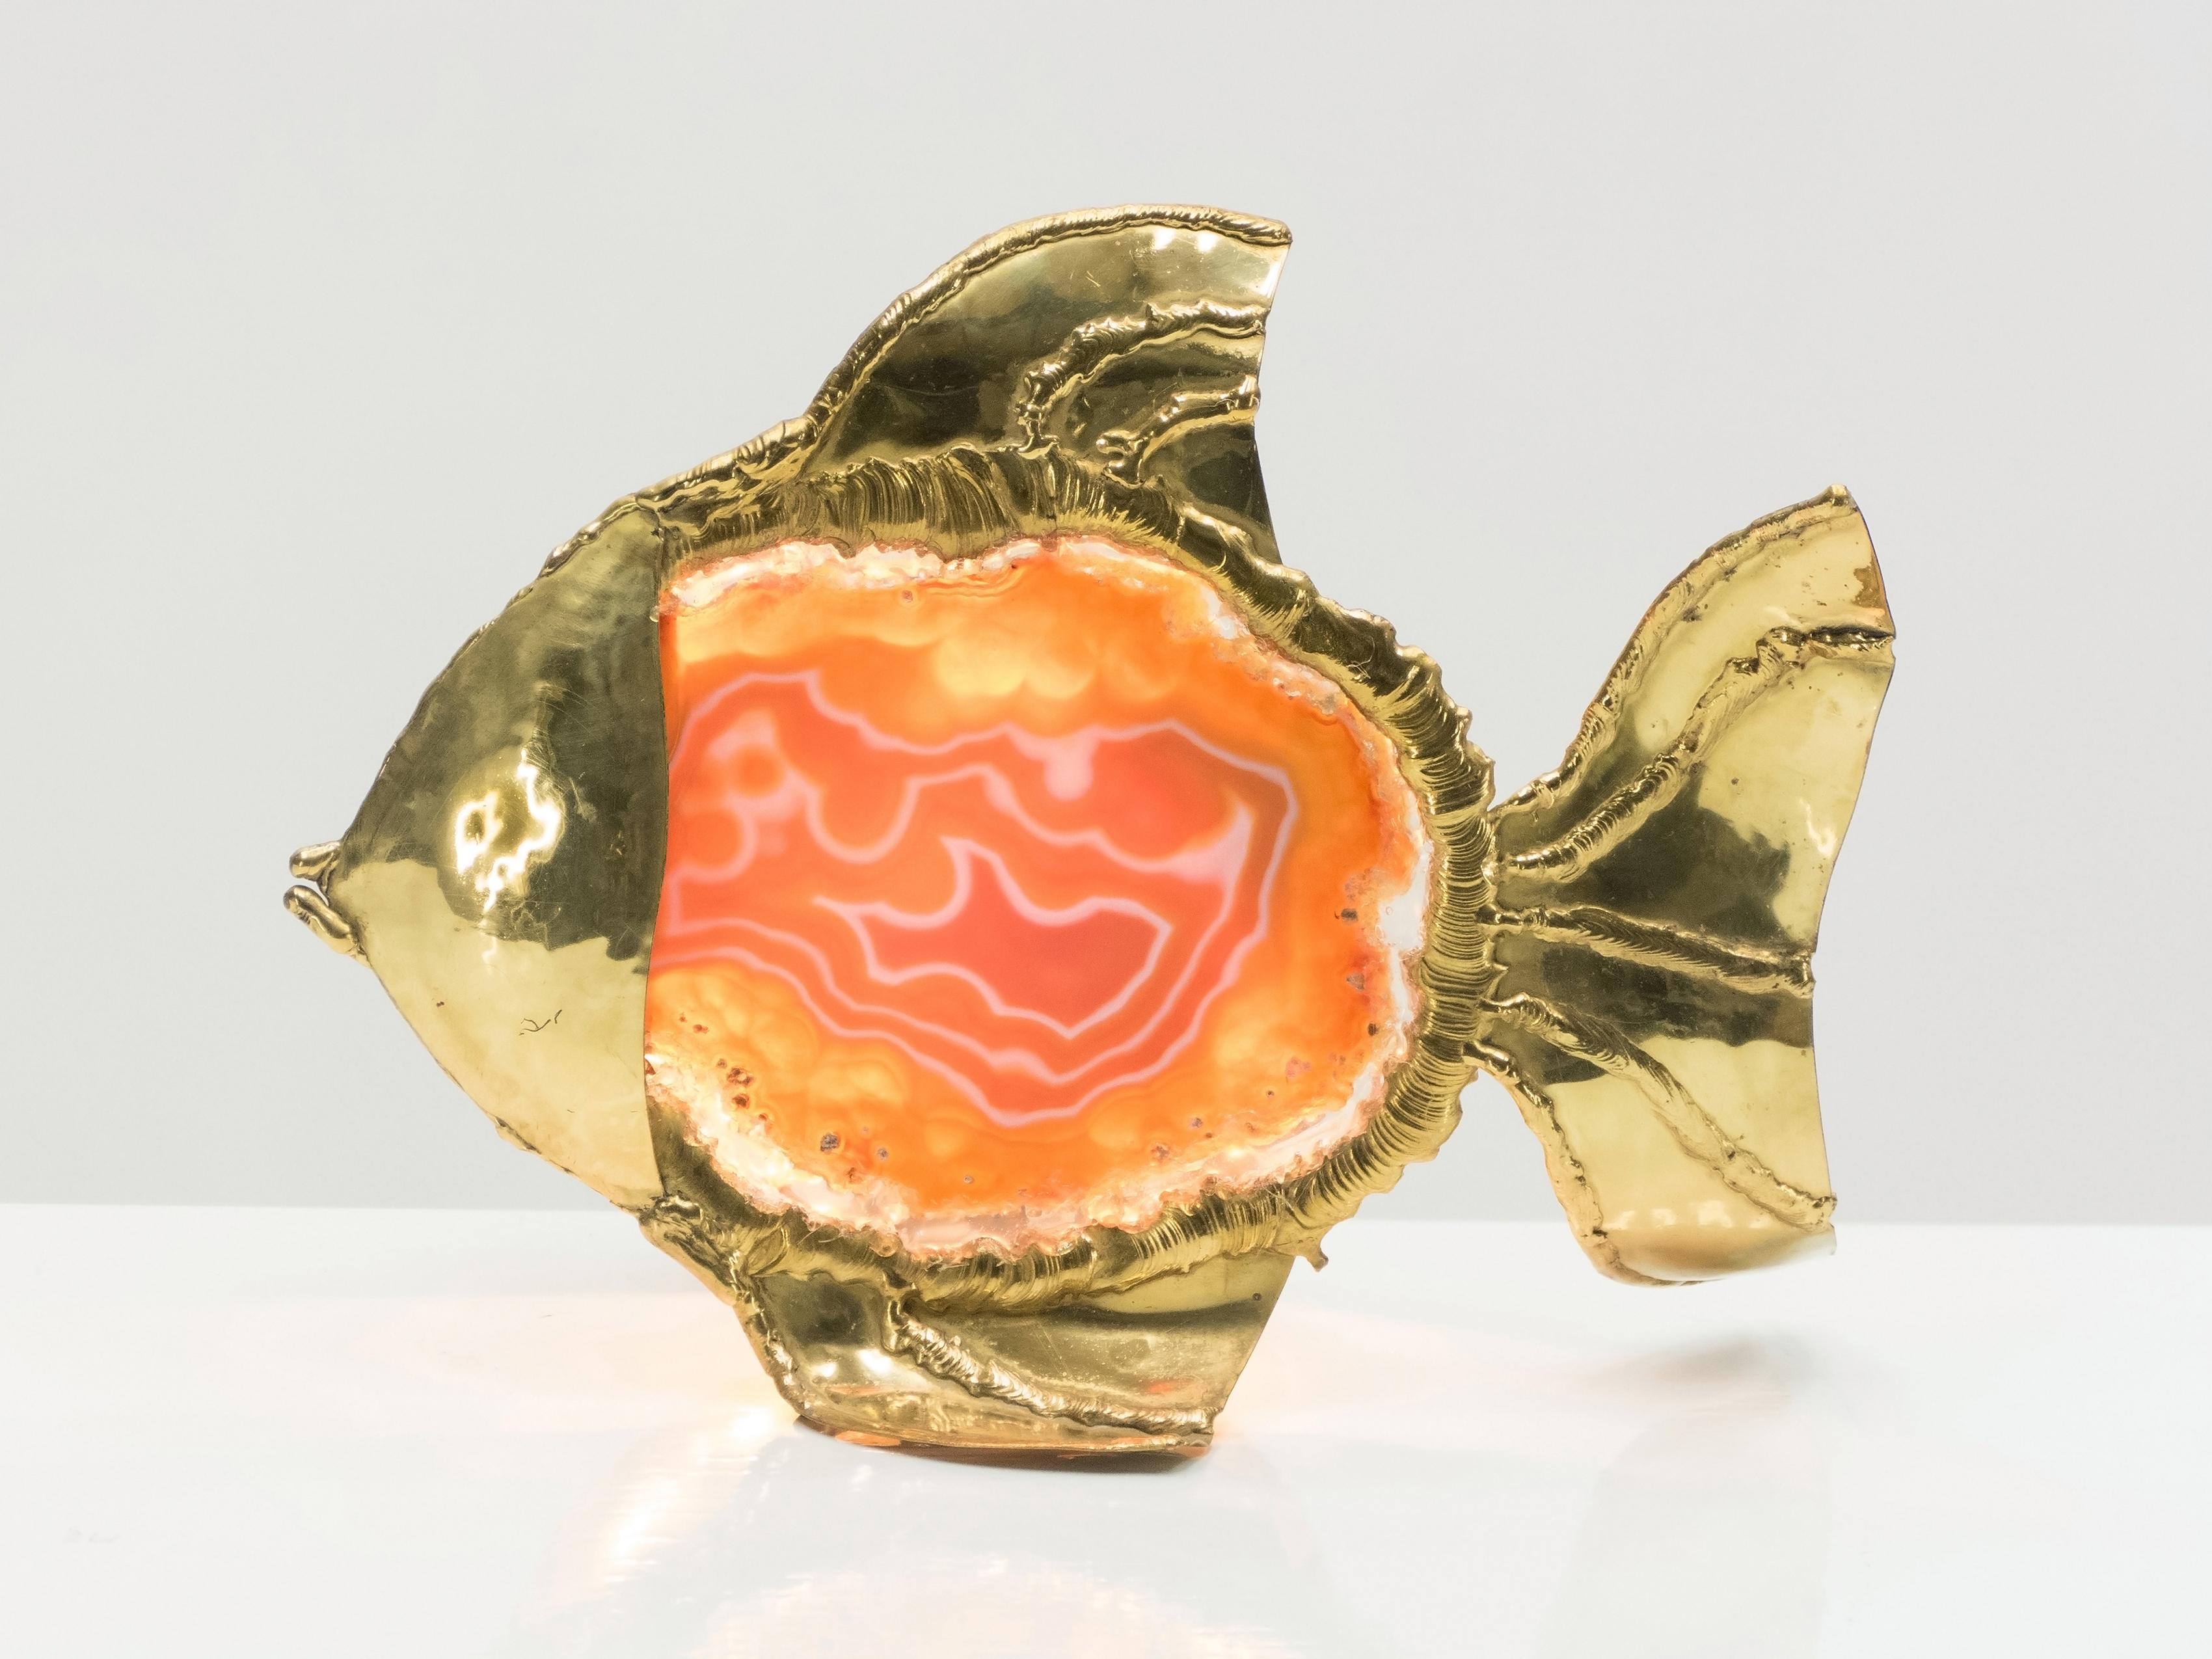 Unique fish sculpture lamp signed by French artist Jacques Duval Brasseur made from an heavy brass structure and a beautiful agate stone. The piece is typical of Jacques Duval-Brasseur design : sculptural, natural, and highly decorative. A cute